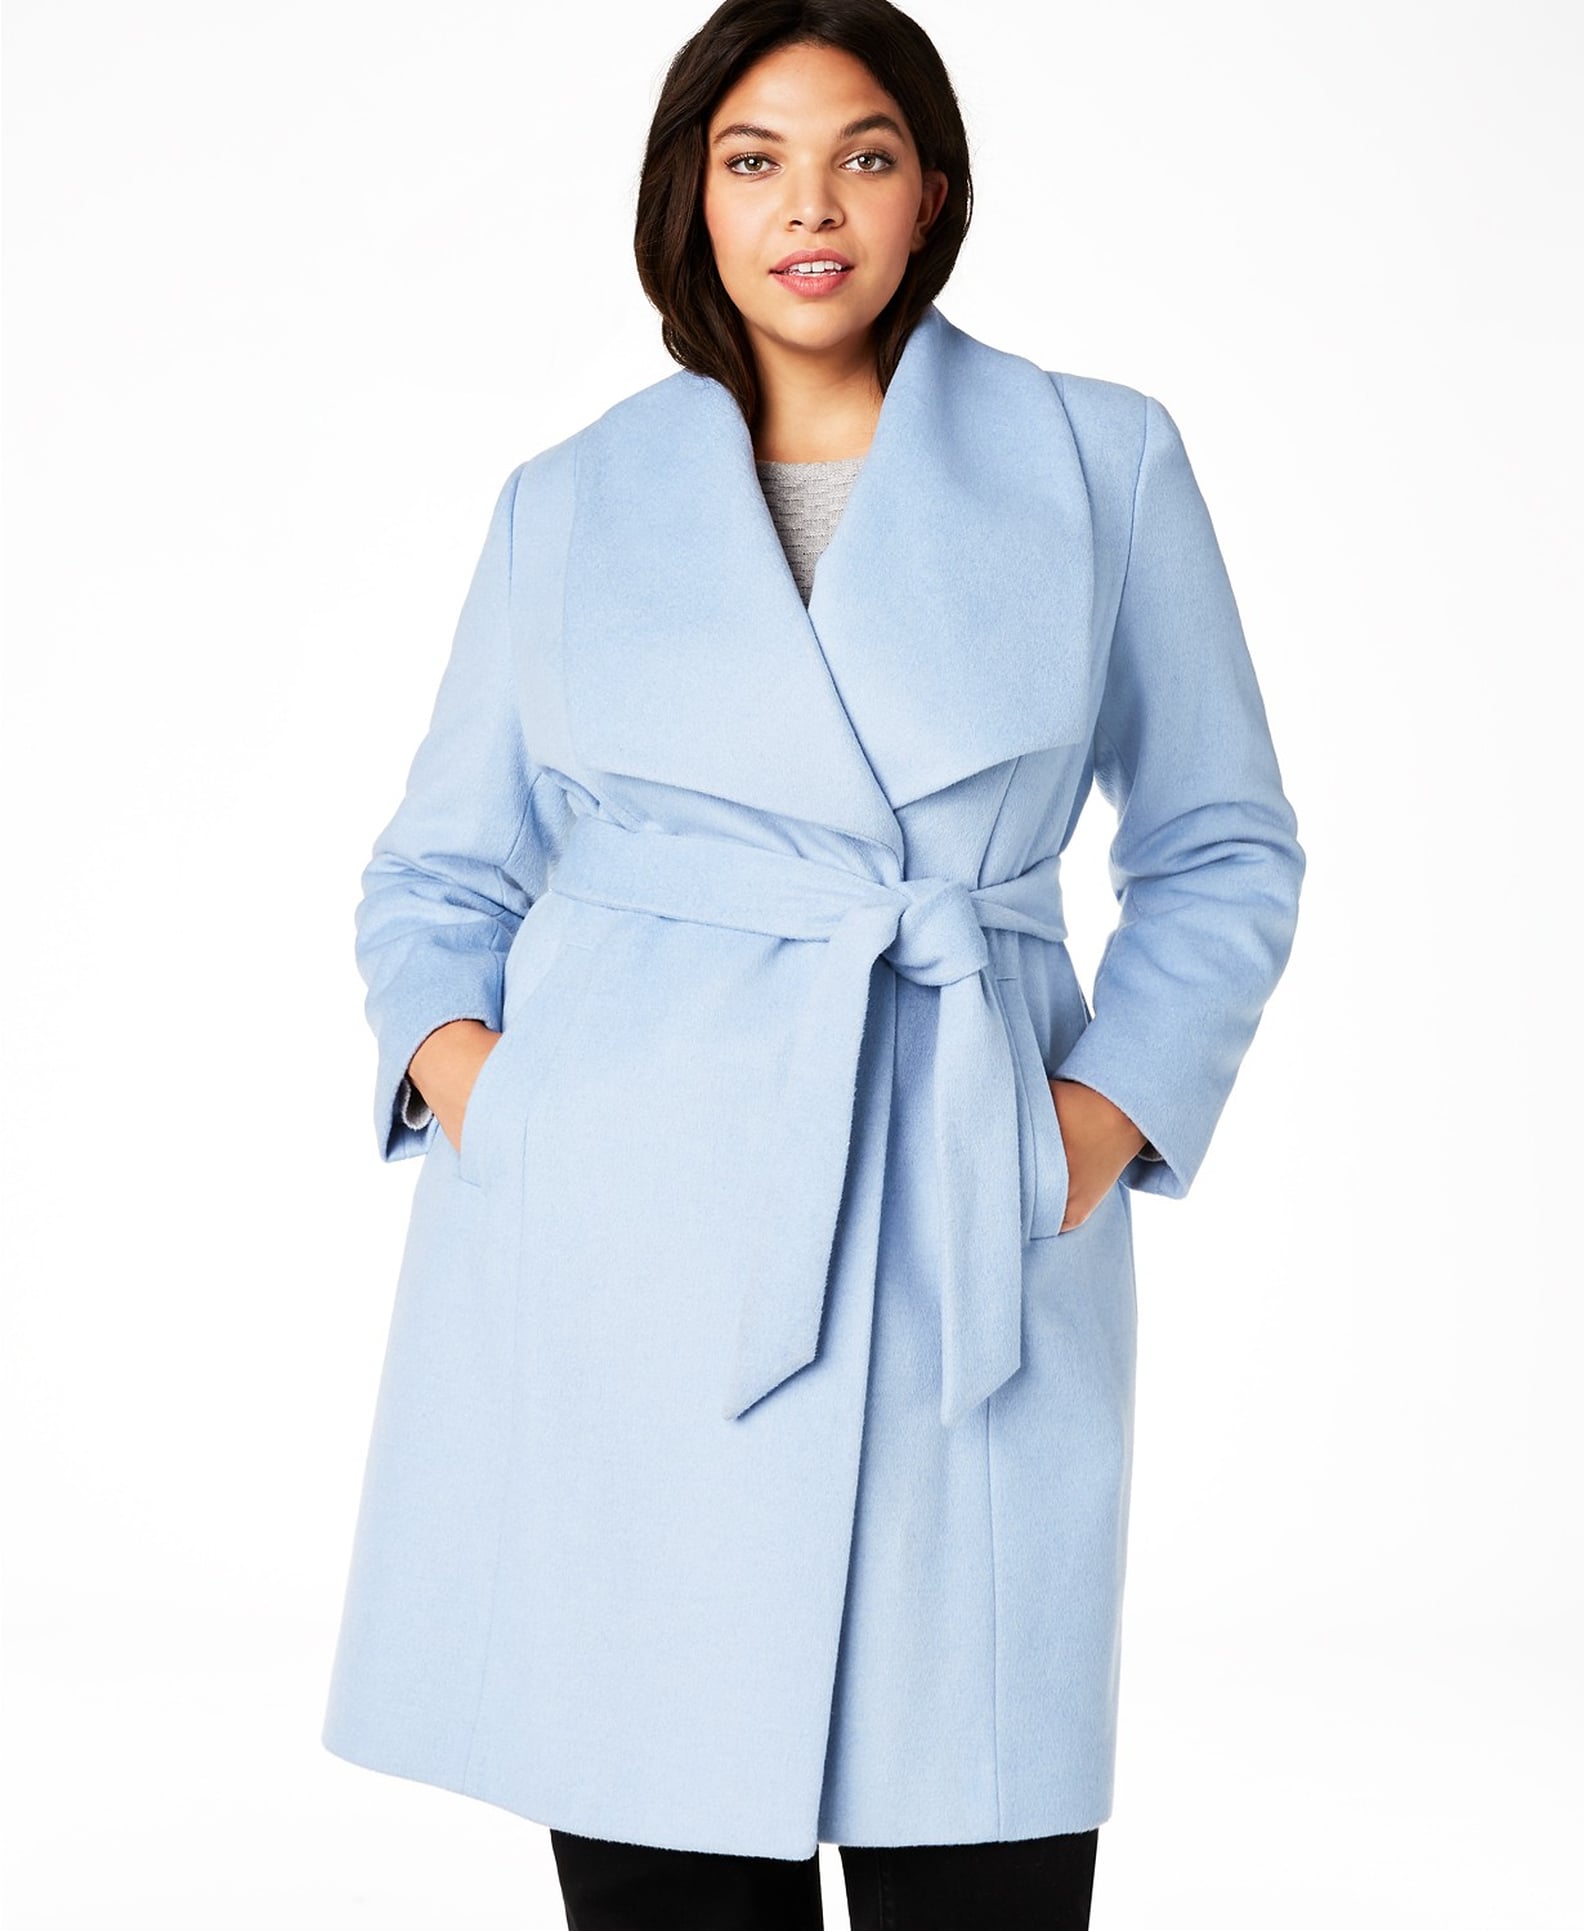 Stylish and Comfortable Coats for Plus-Size Women at Macy's | POPSUGAR ...